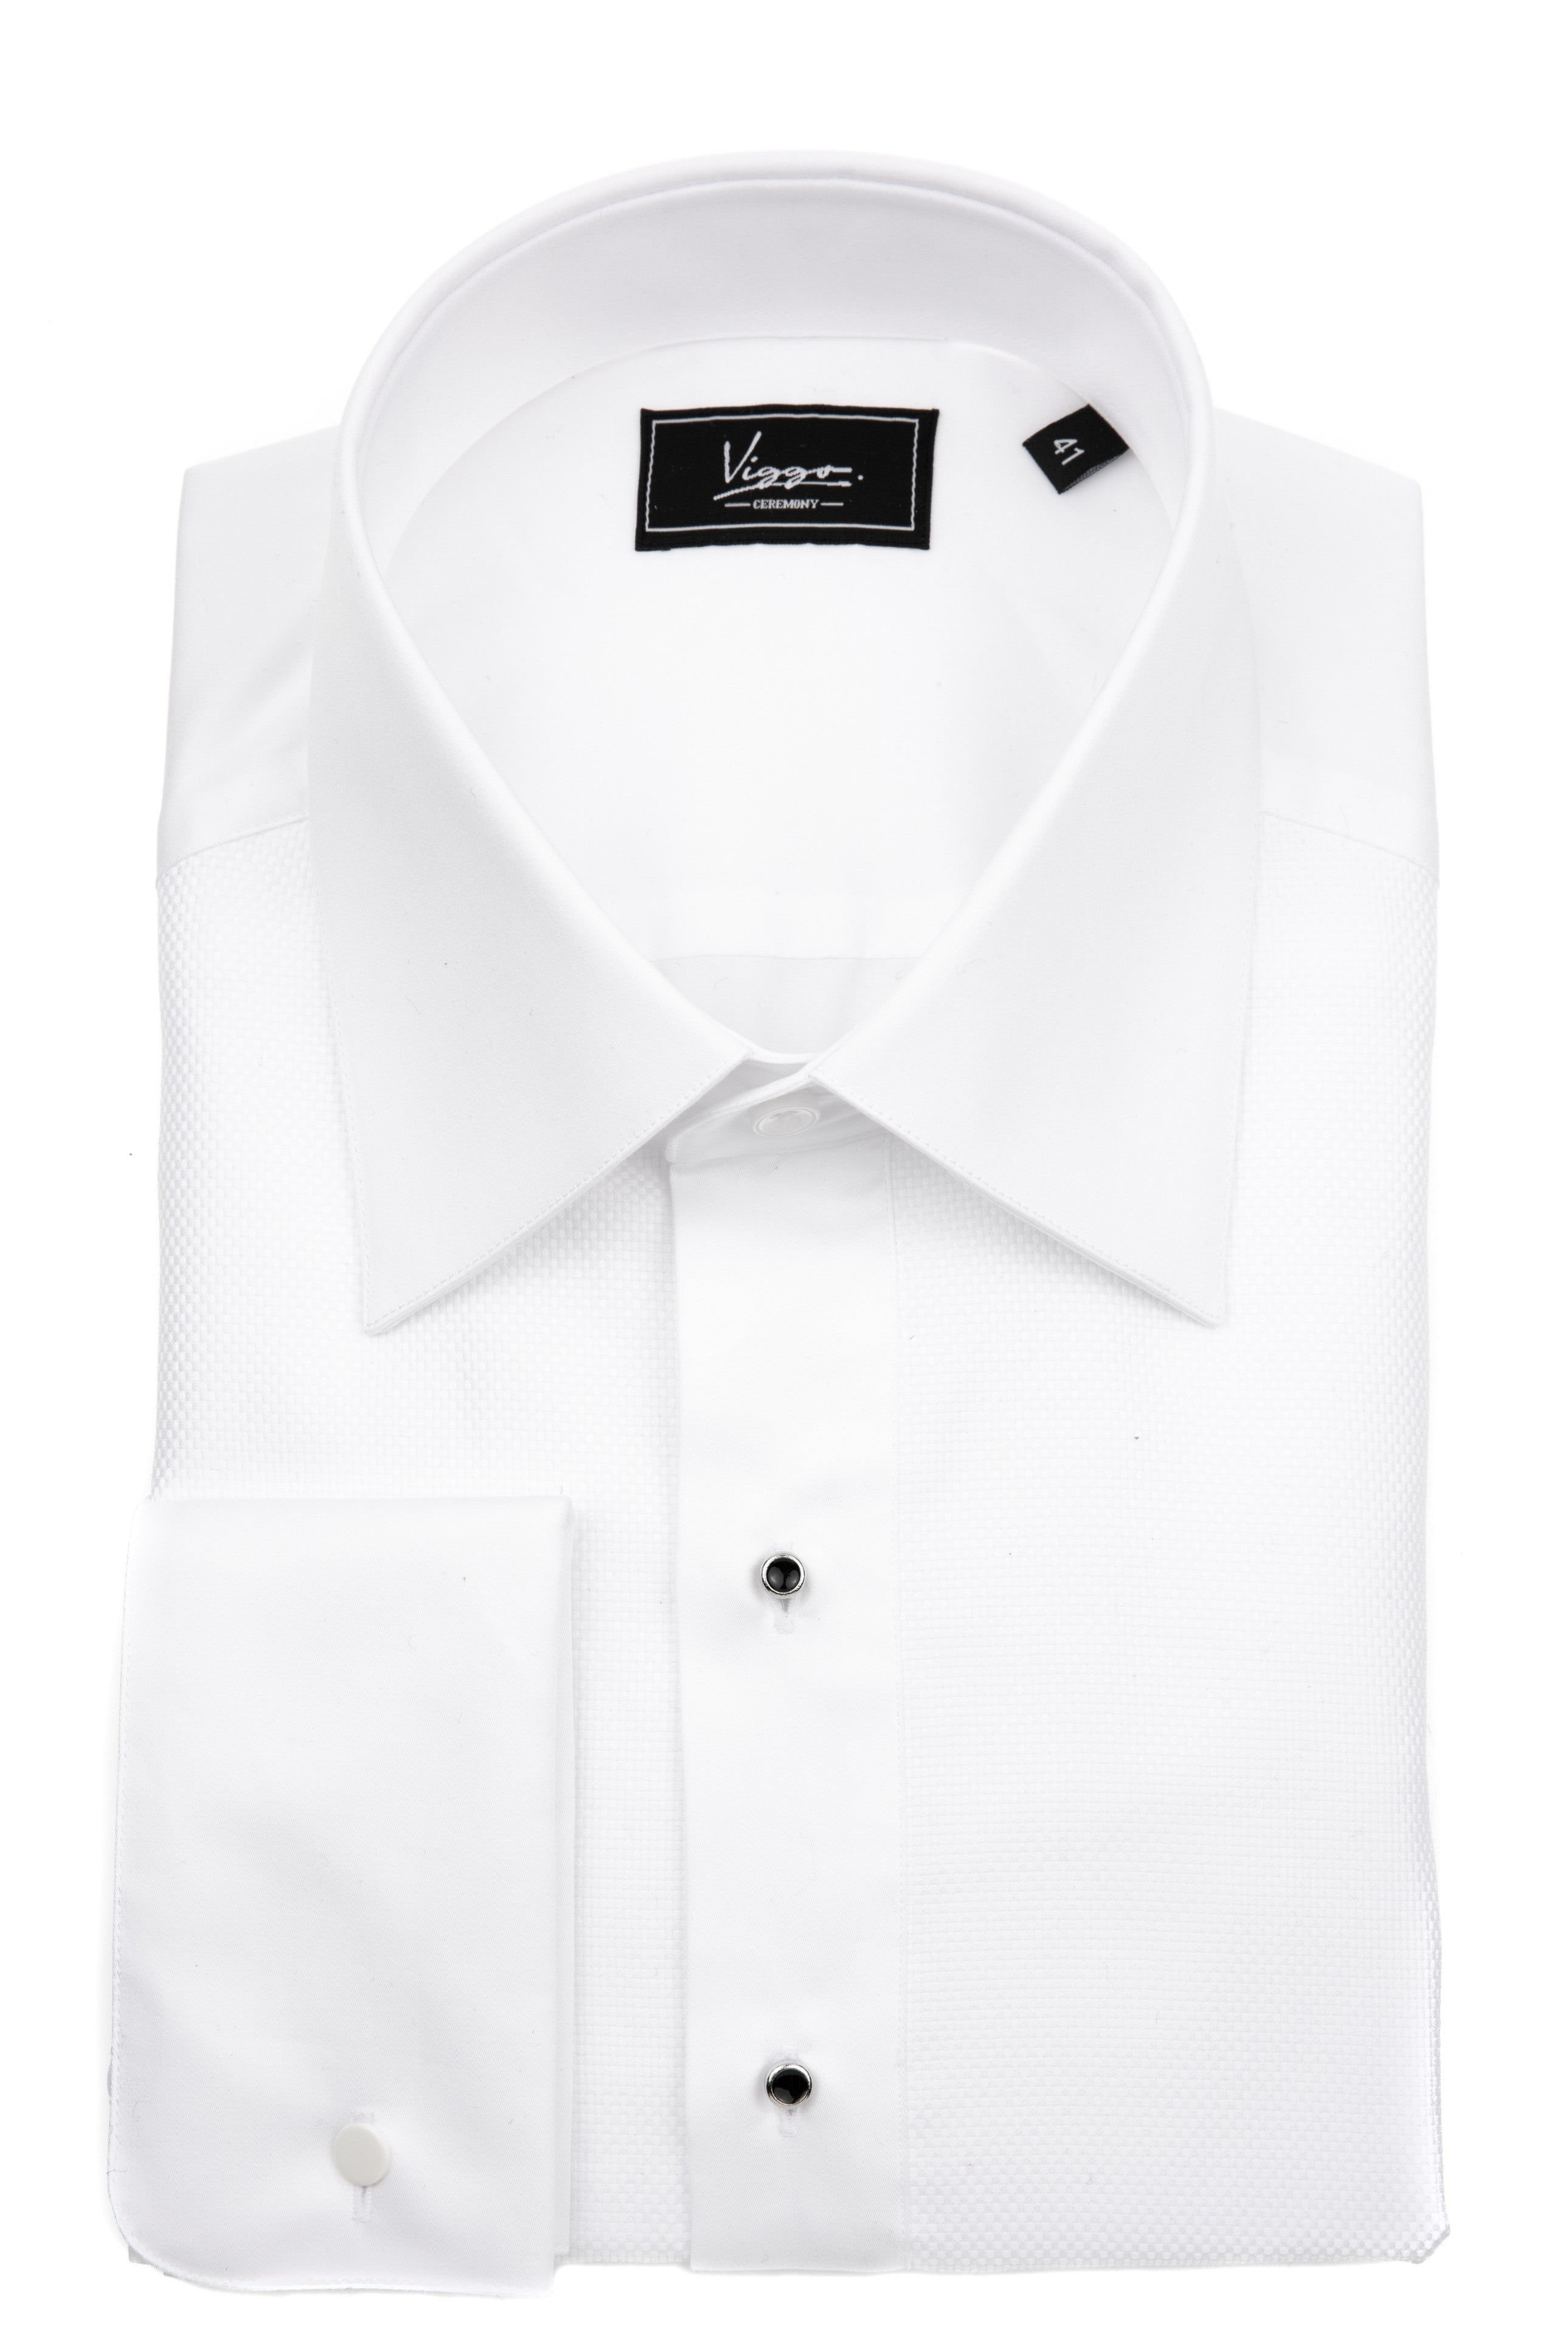 Finely textured white shirt with jewel buttons